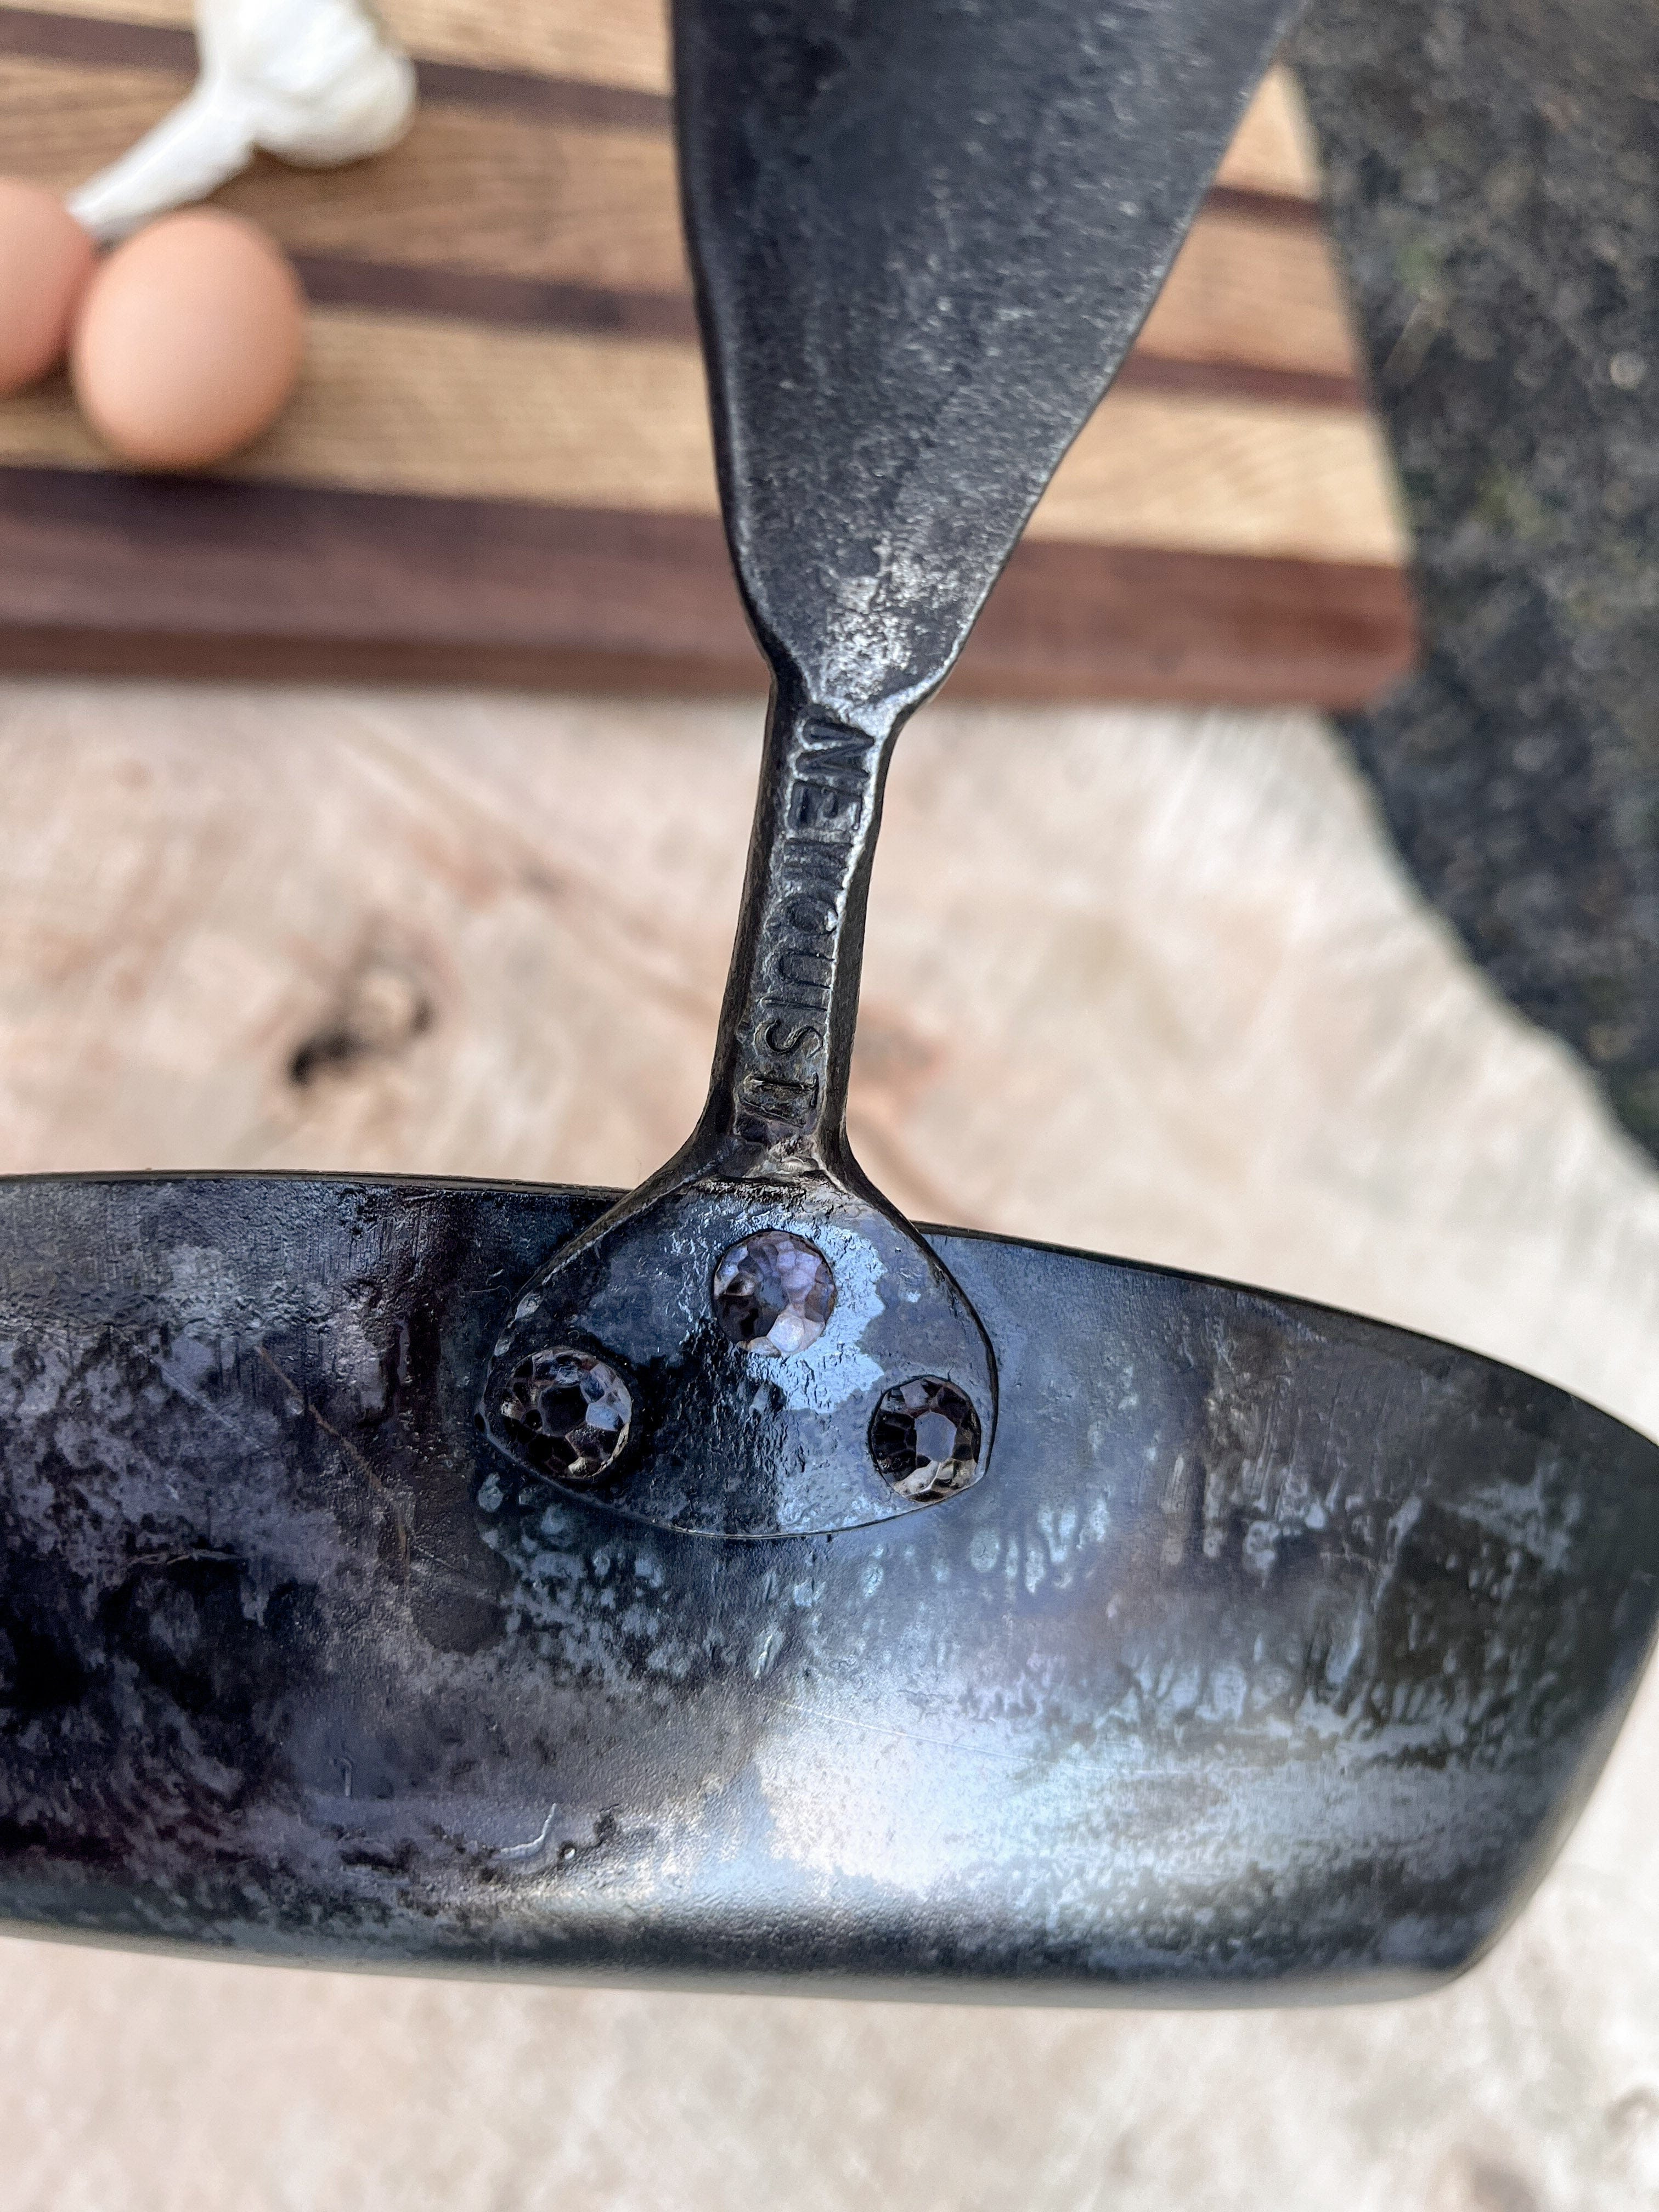 Carbon Steel French Skillet by Newquist Forge